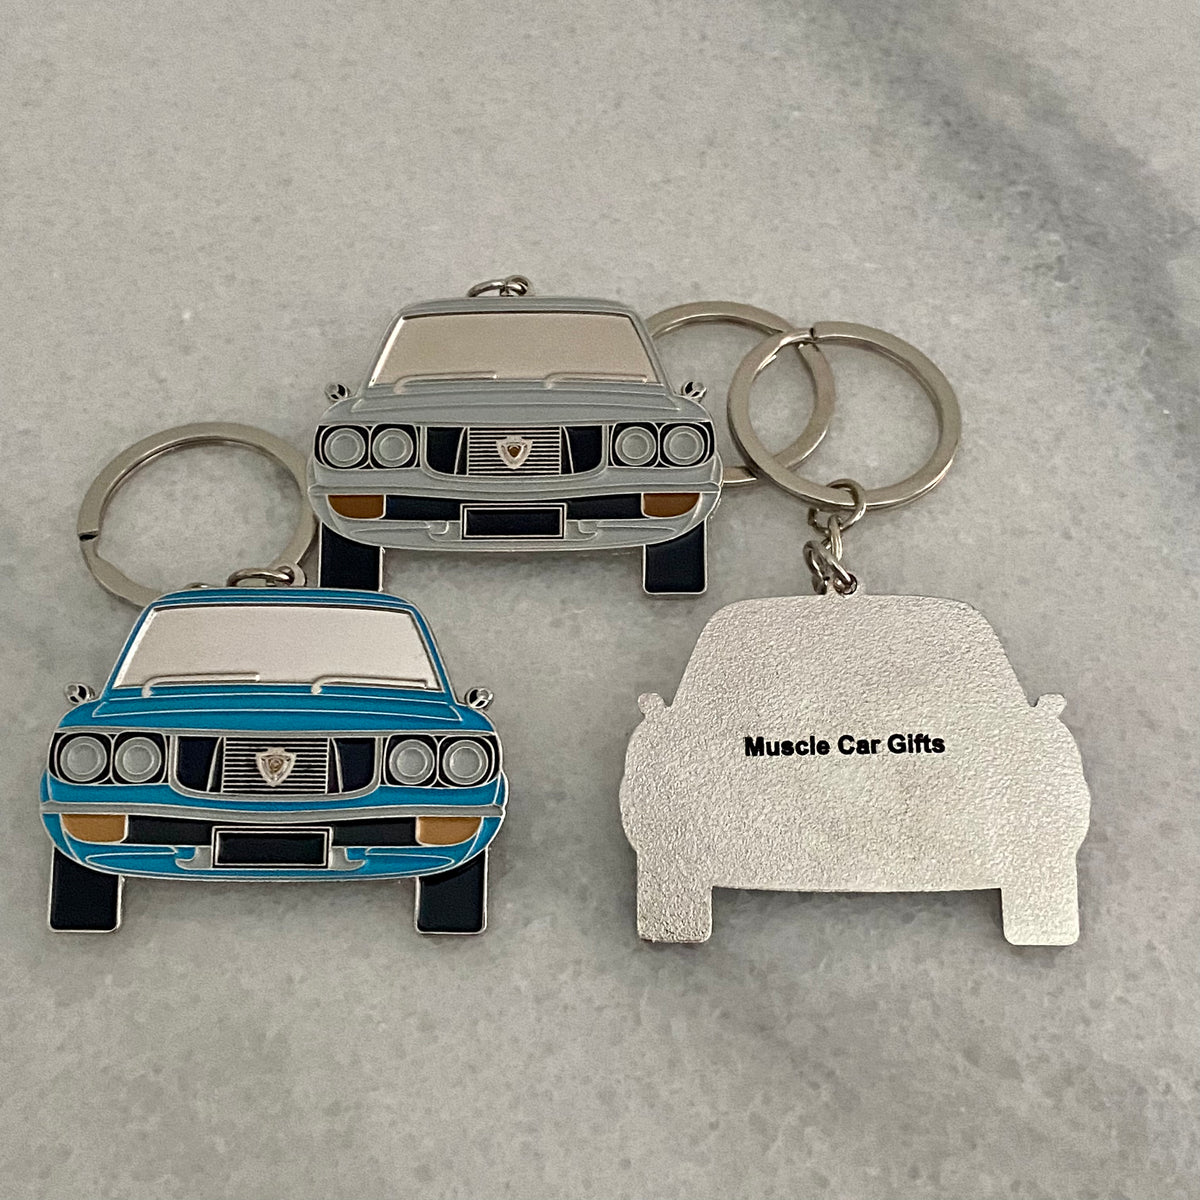 🔴MAZDA - Japanese Famous Car Company - well made vintage keychain🔴type 3